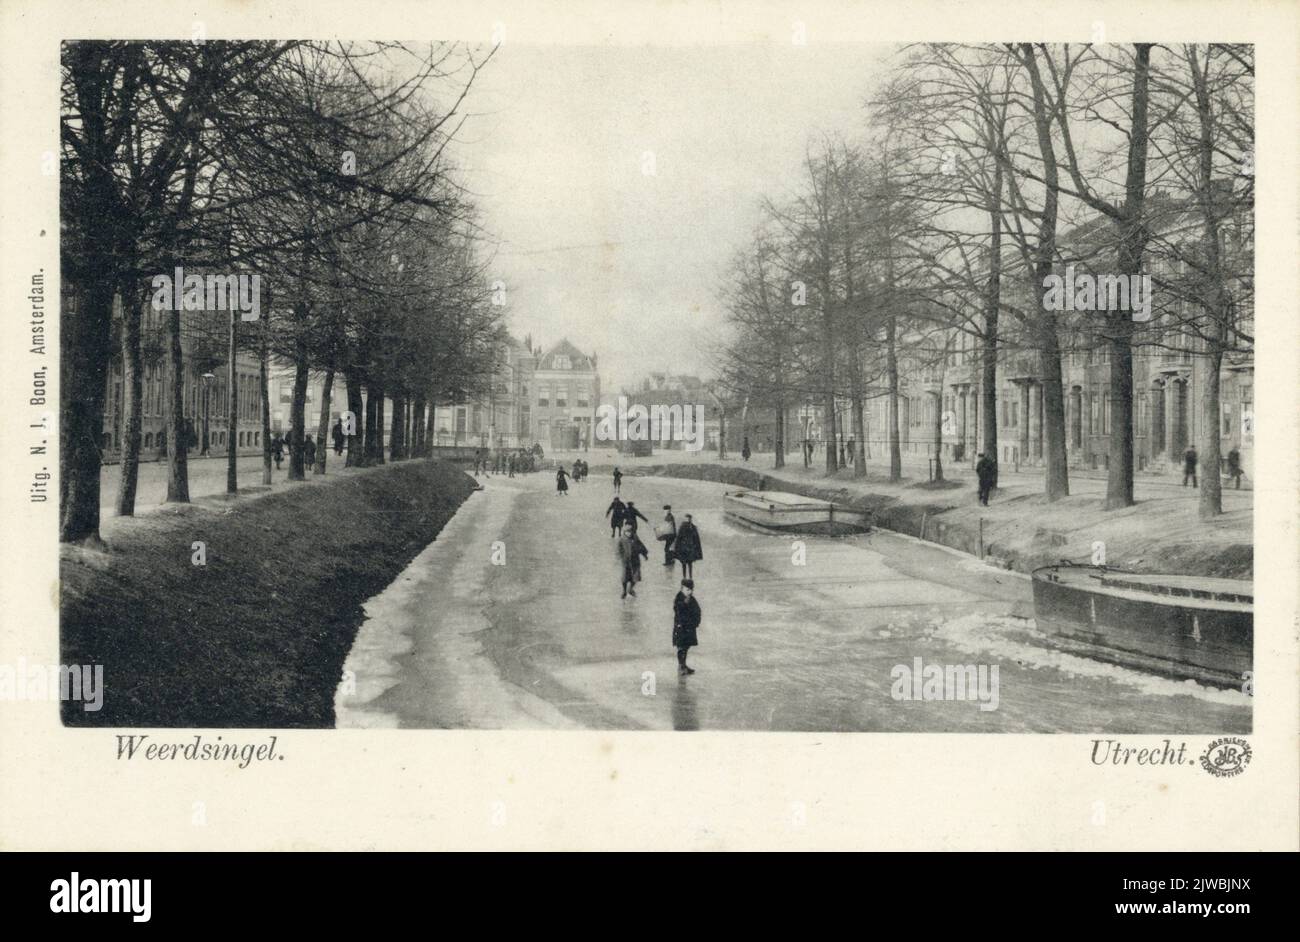 View of the frozen Stadsbuitengracht in Utrecht with some skaters; On the right a few houses on the Weerdsingel O.Z Stock Photo